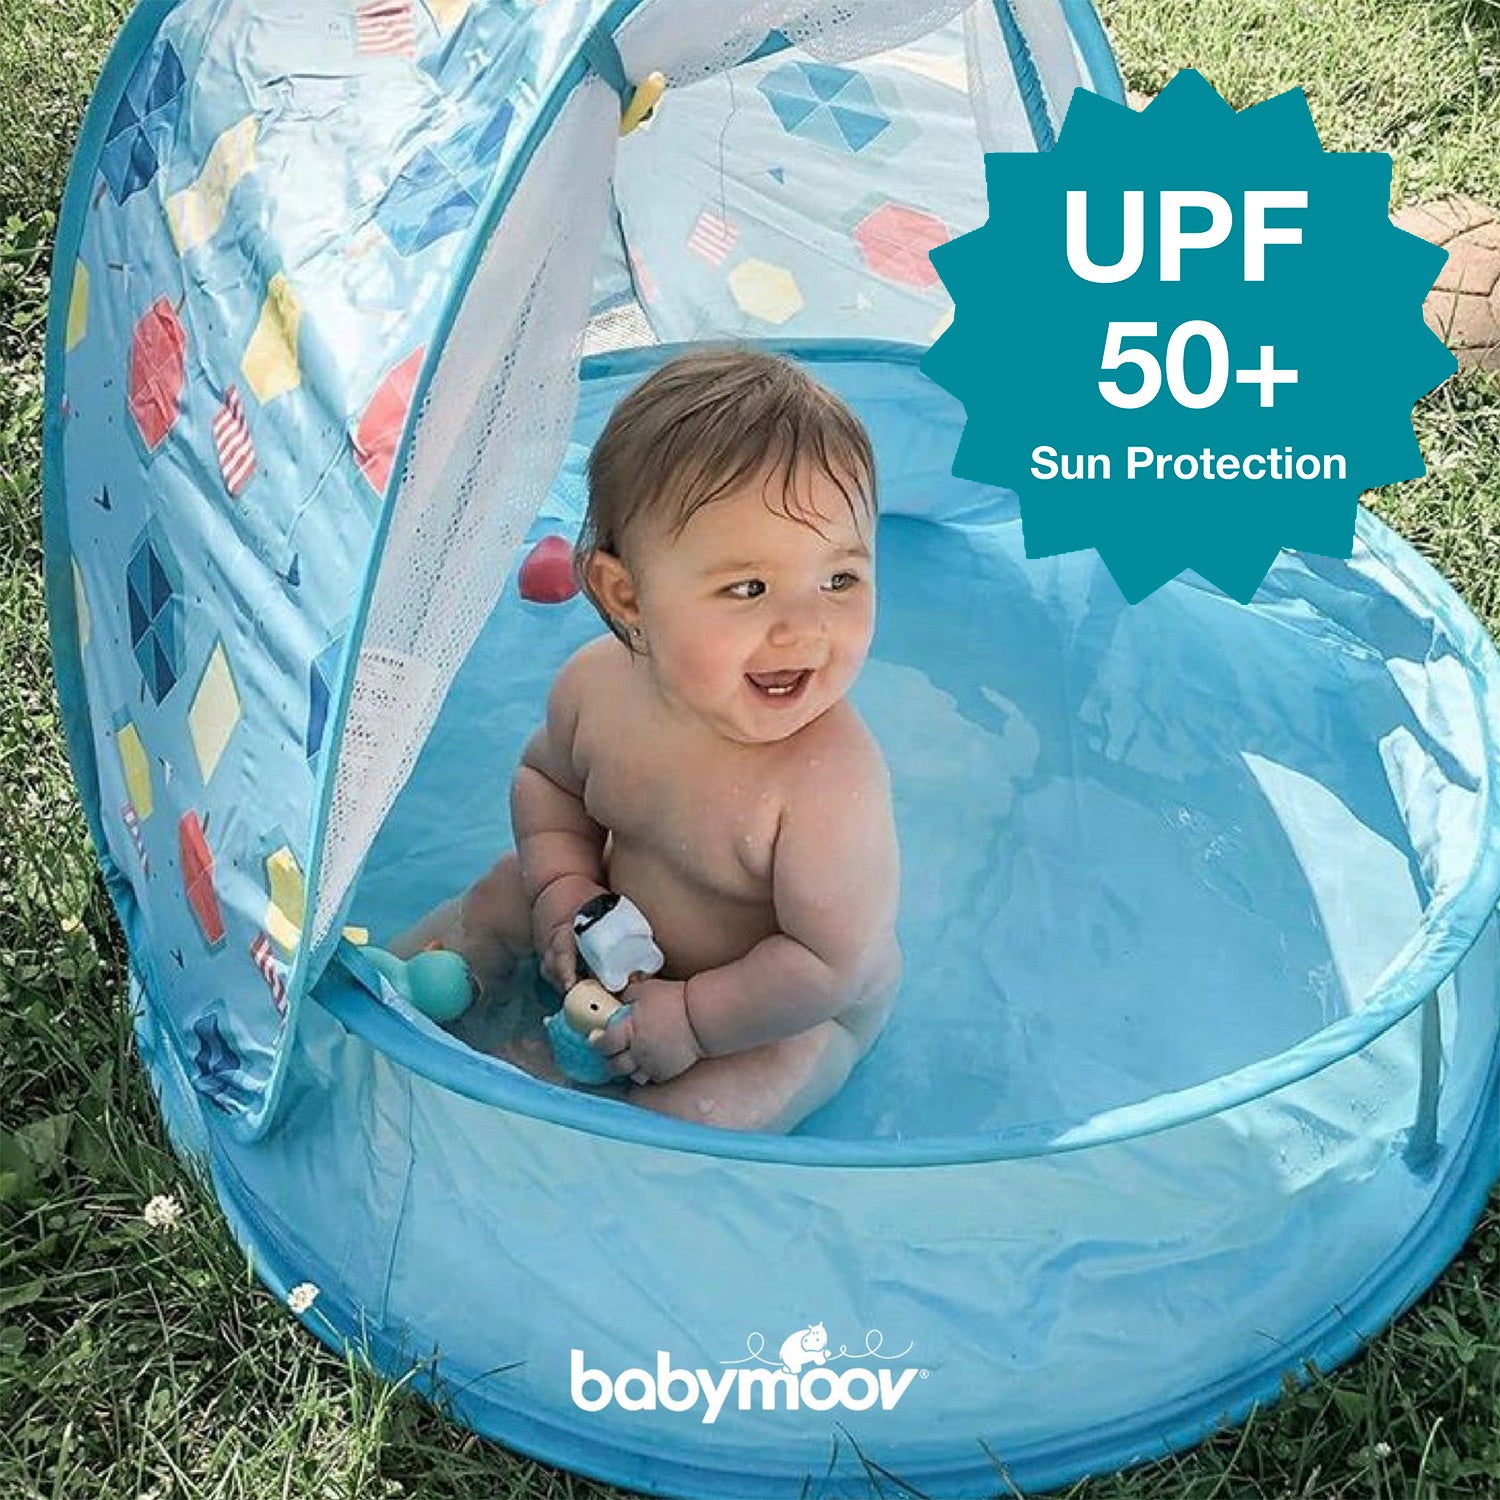 Pop up Anti uv beach tent for babies infants and toddlers. Mosquito proof pop up tent. Pool pop up tent. Tent with pool. Pool can be turned into ball pit tent. Sun shelter for babies with pool. Fill water in the tent to turn it into a pool tent. Kiddie pool. Blue design in kiddie pool. Baby pool.